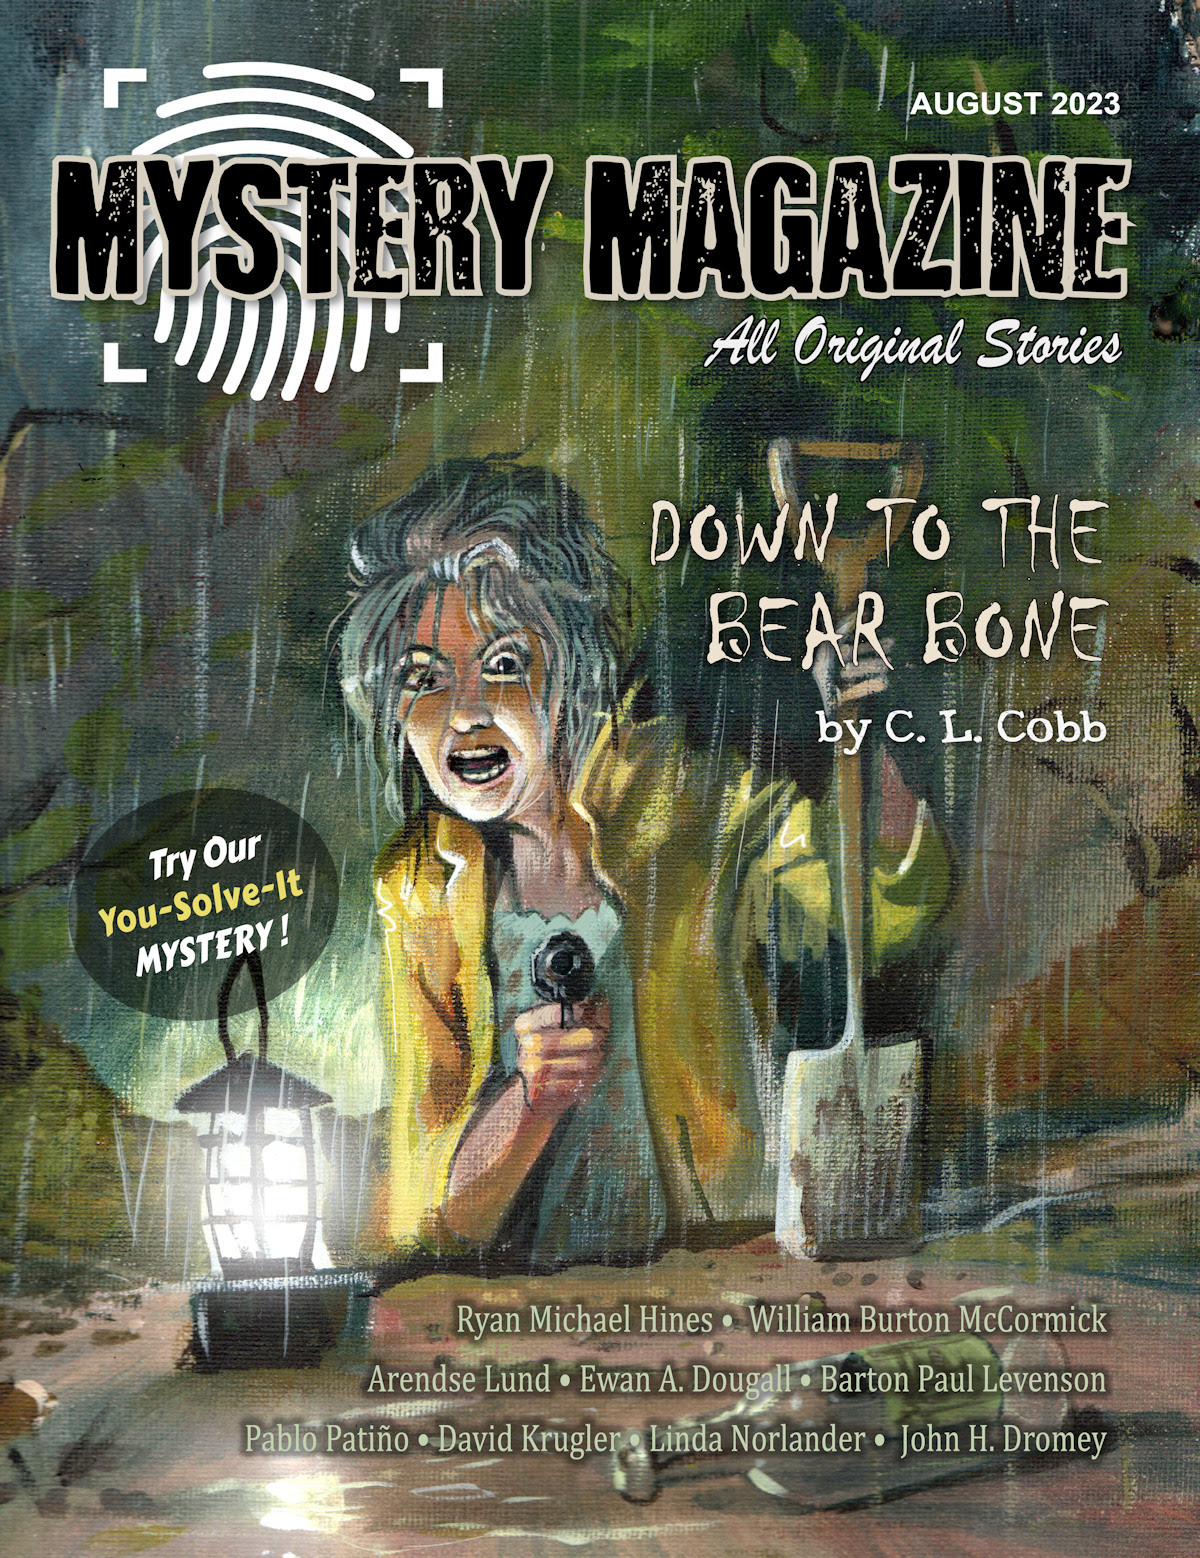 Cover of August 2023 issue of Mystery Magazine